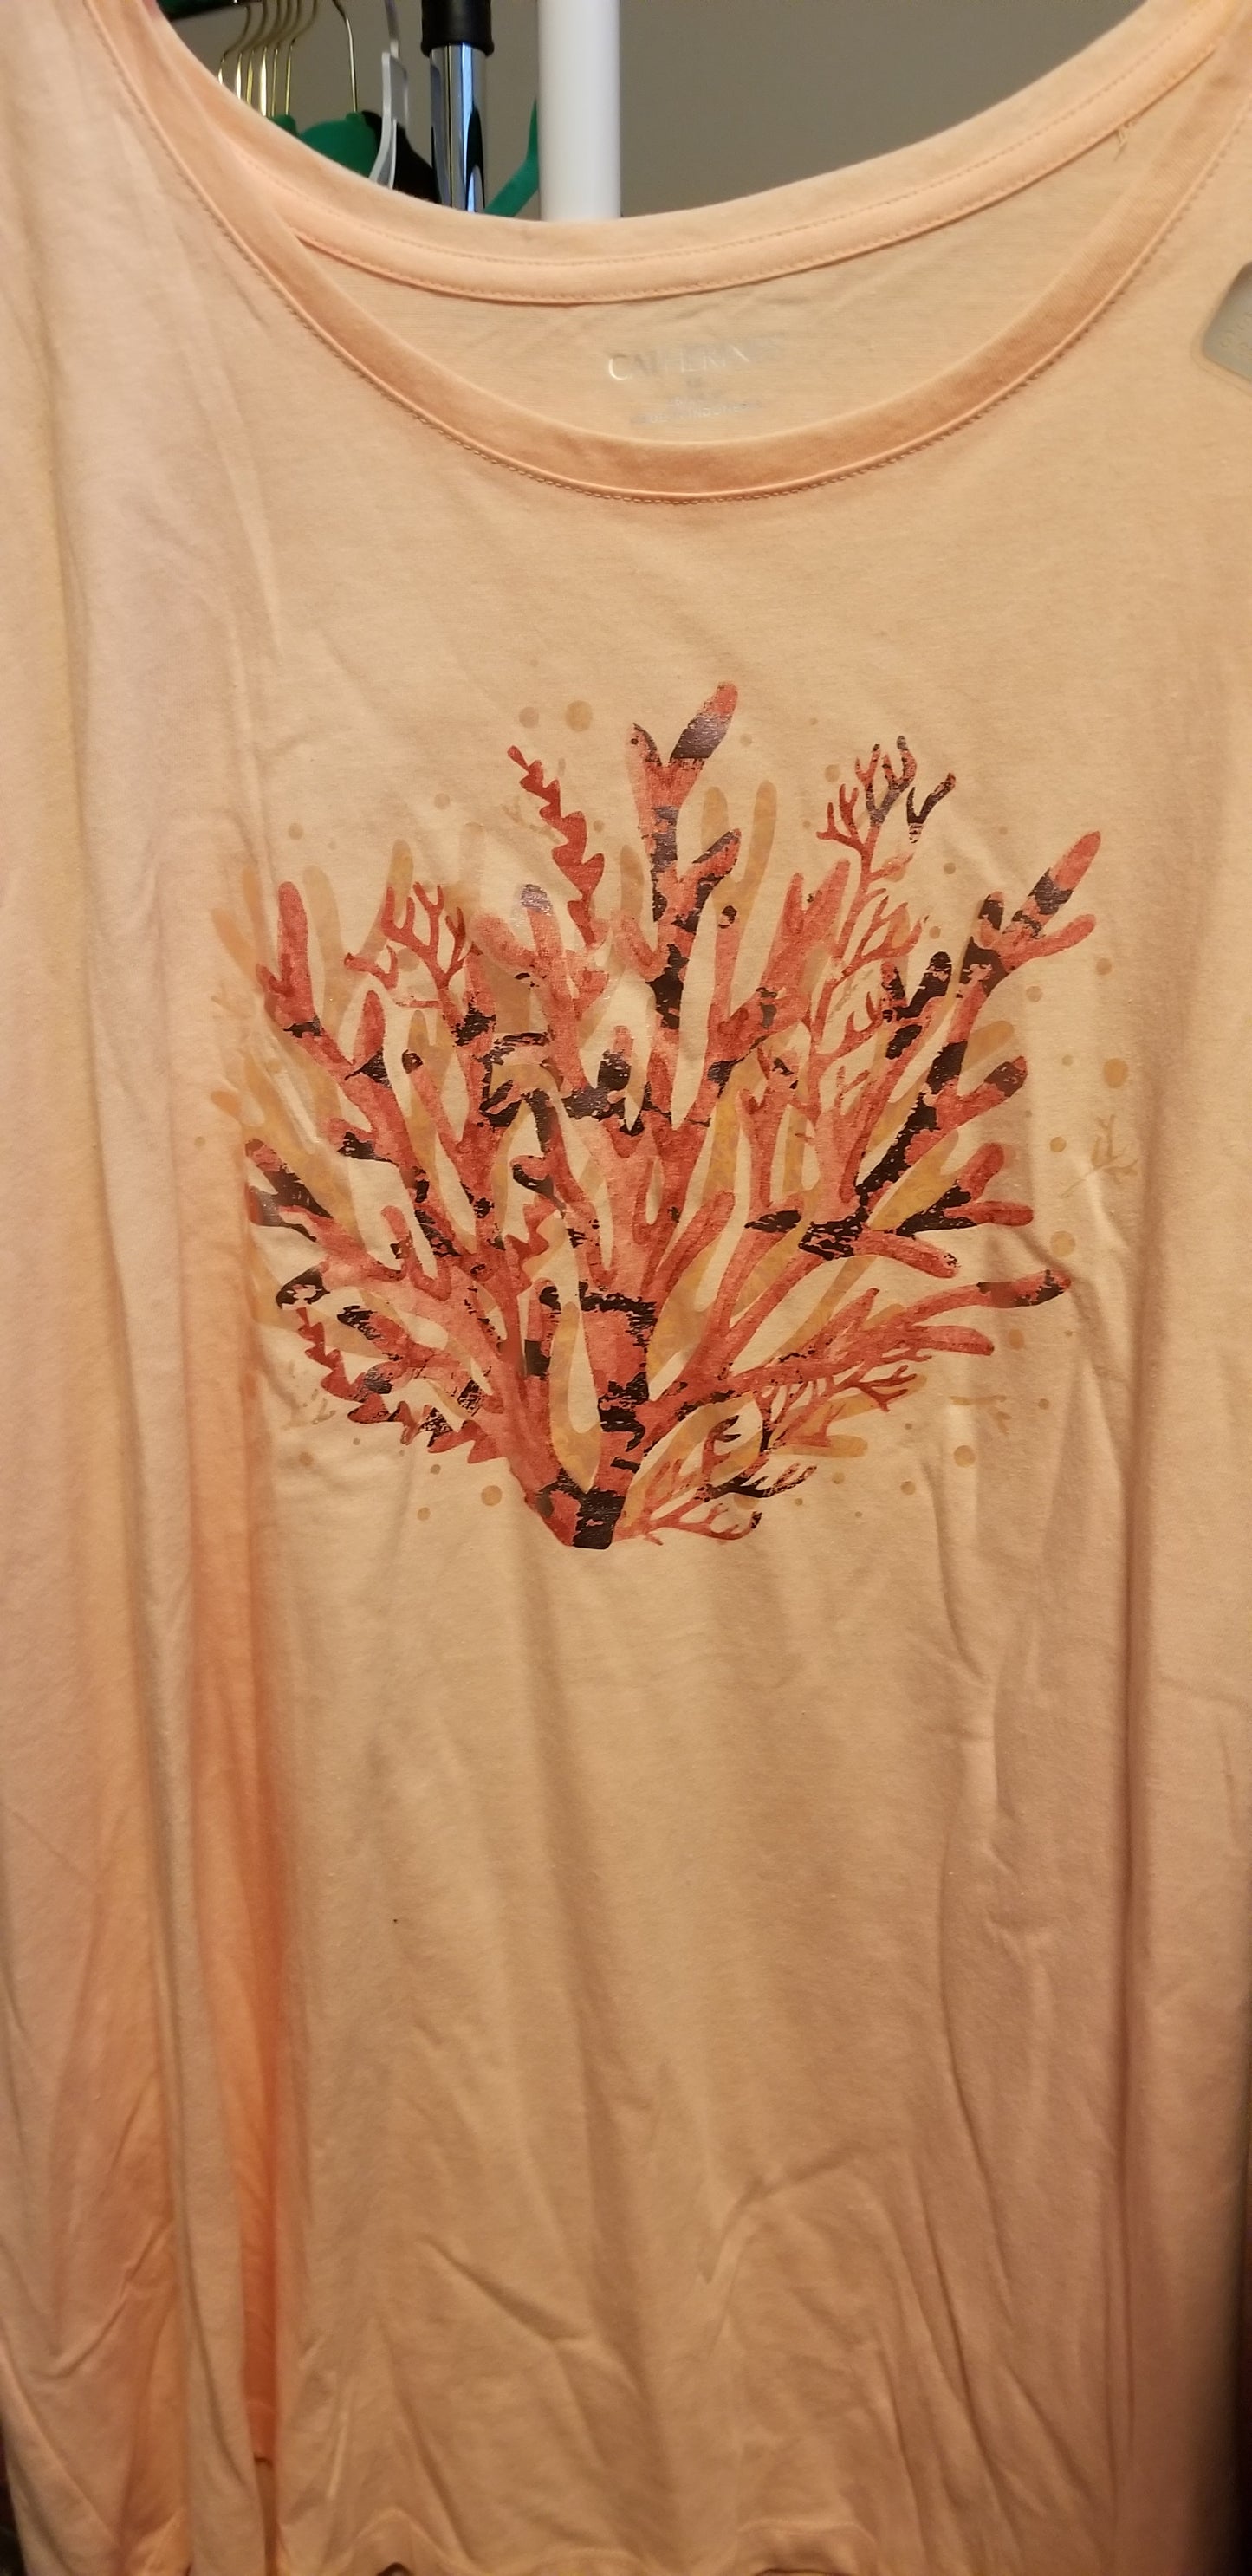 Coral Reef Short Sleeve Tee (Size 3x and 6x) - Keene's